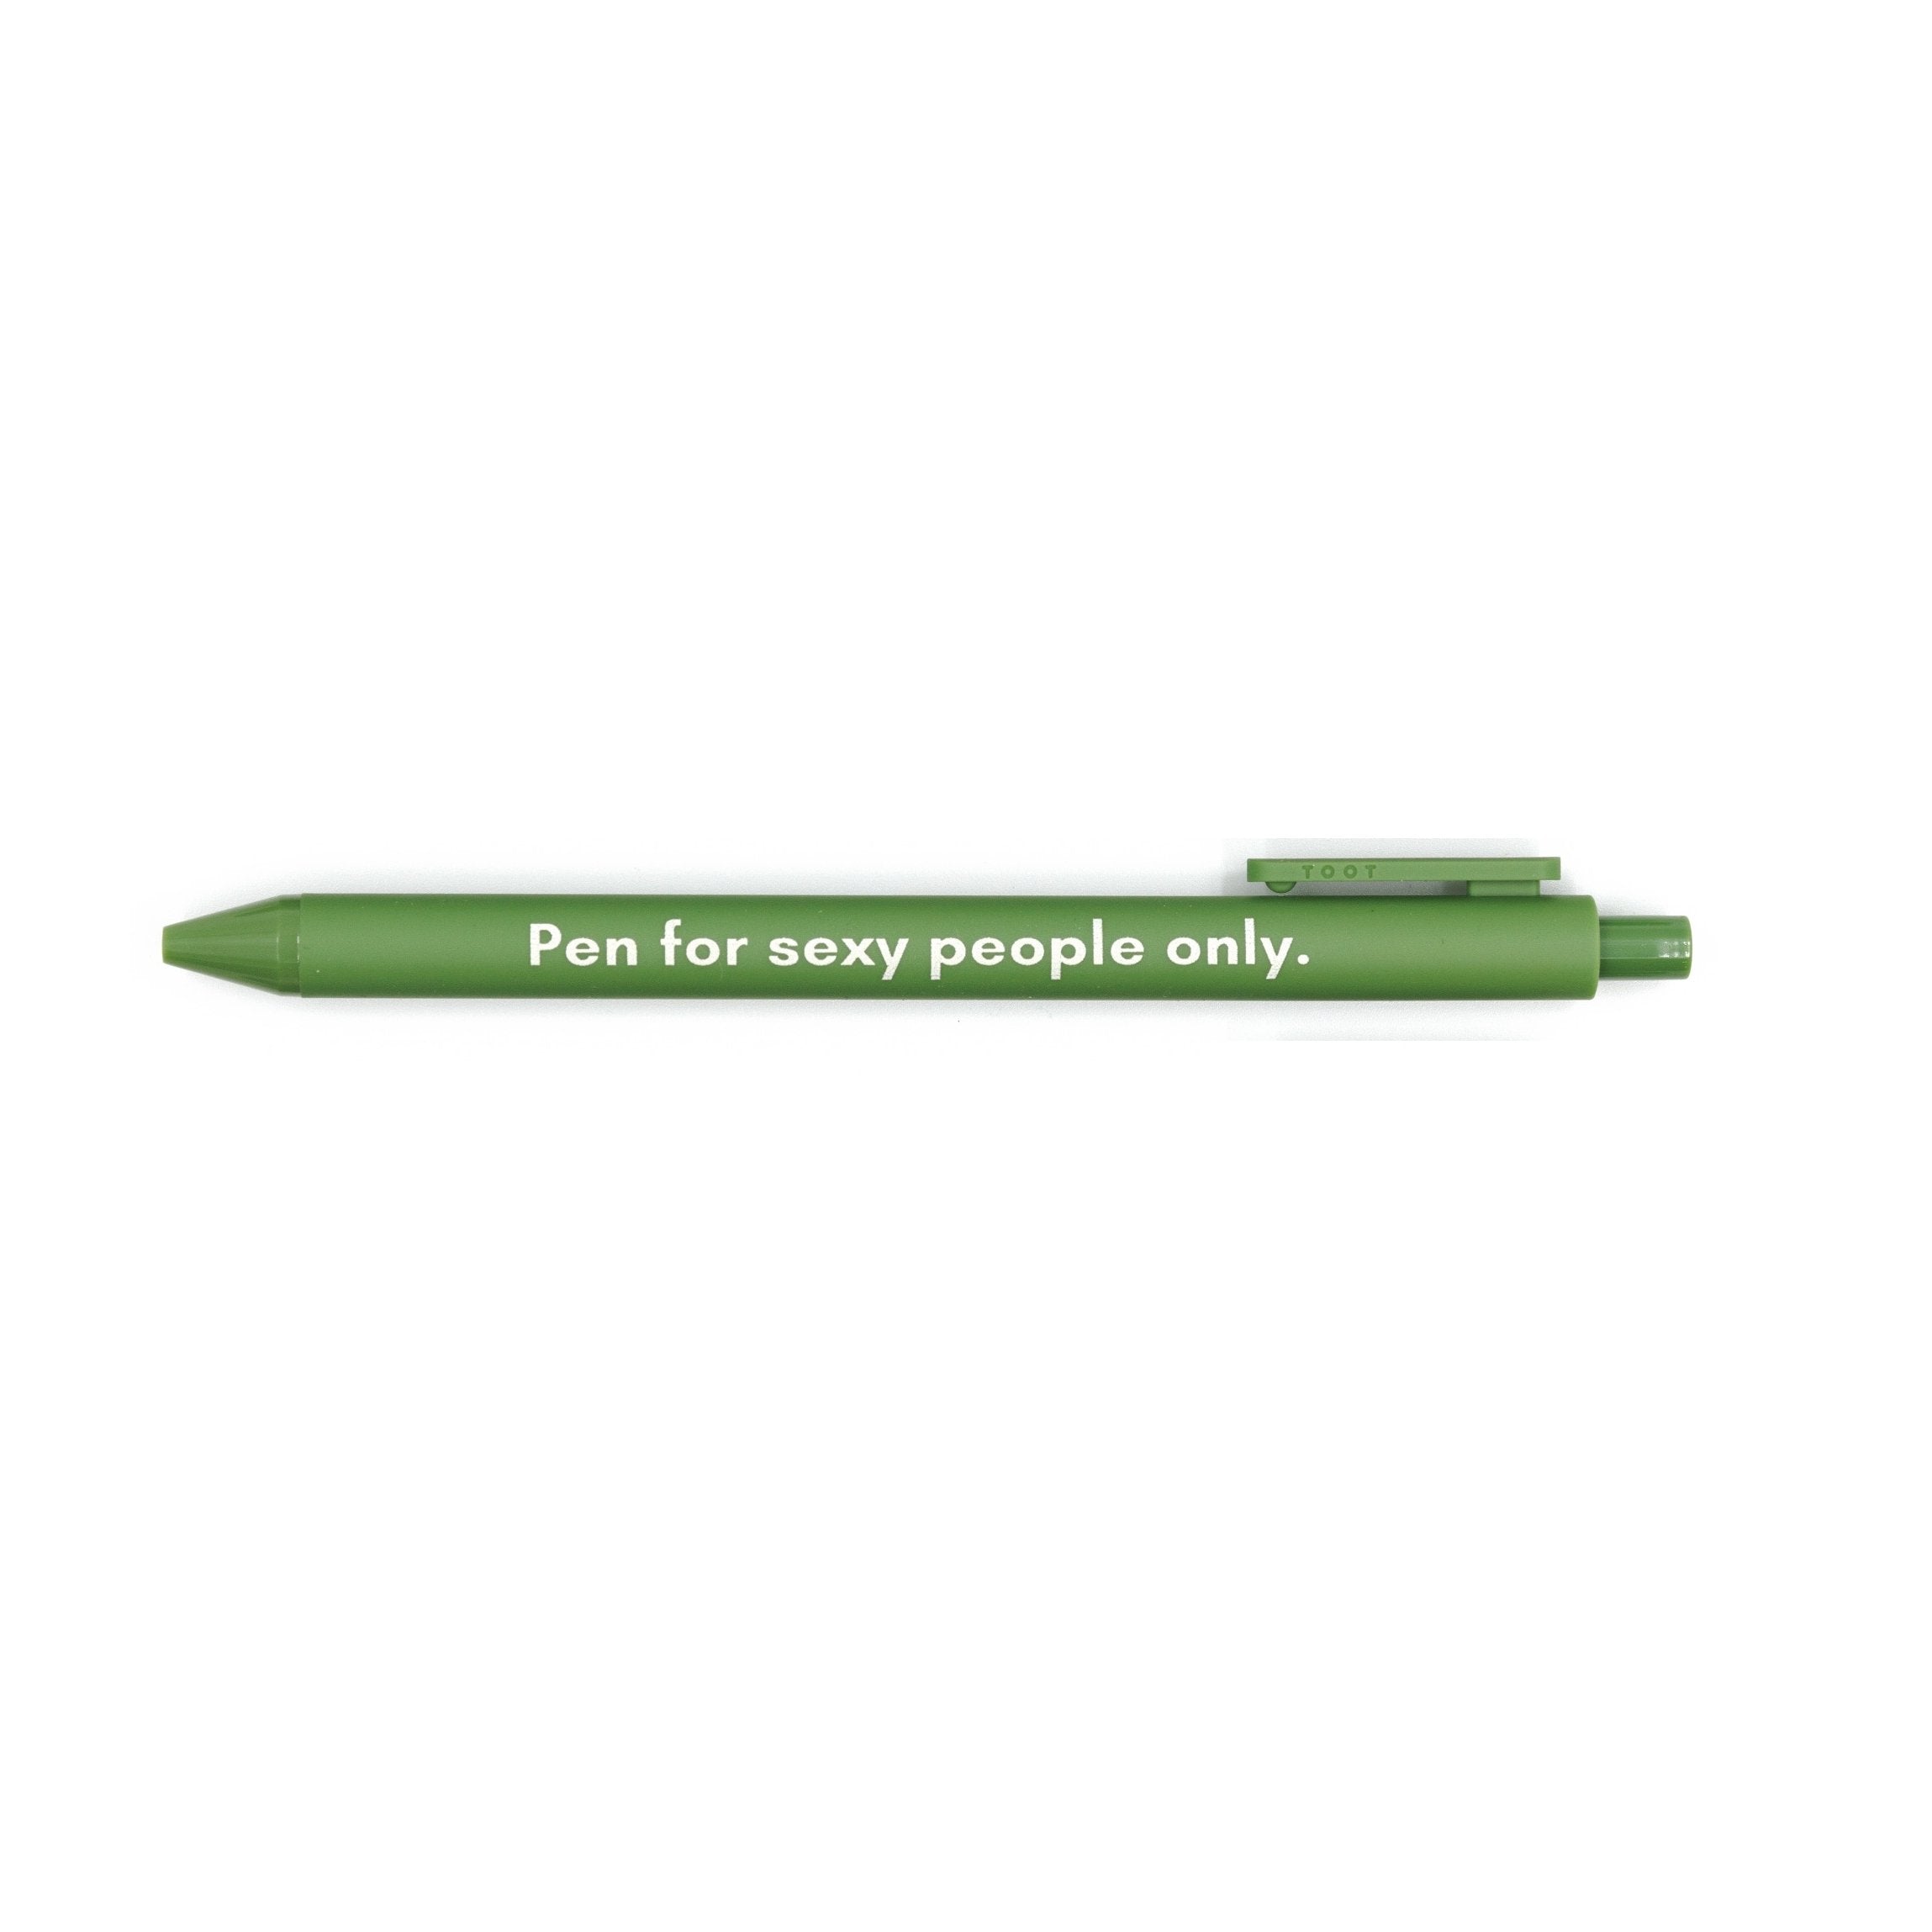 Sweary Fuck Pens Cussing Pen Gift Set - 5 Multicolored Gel Pens Rife with  Profanity by The Bullish Store